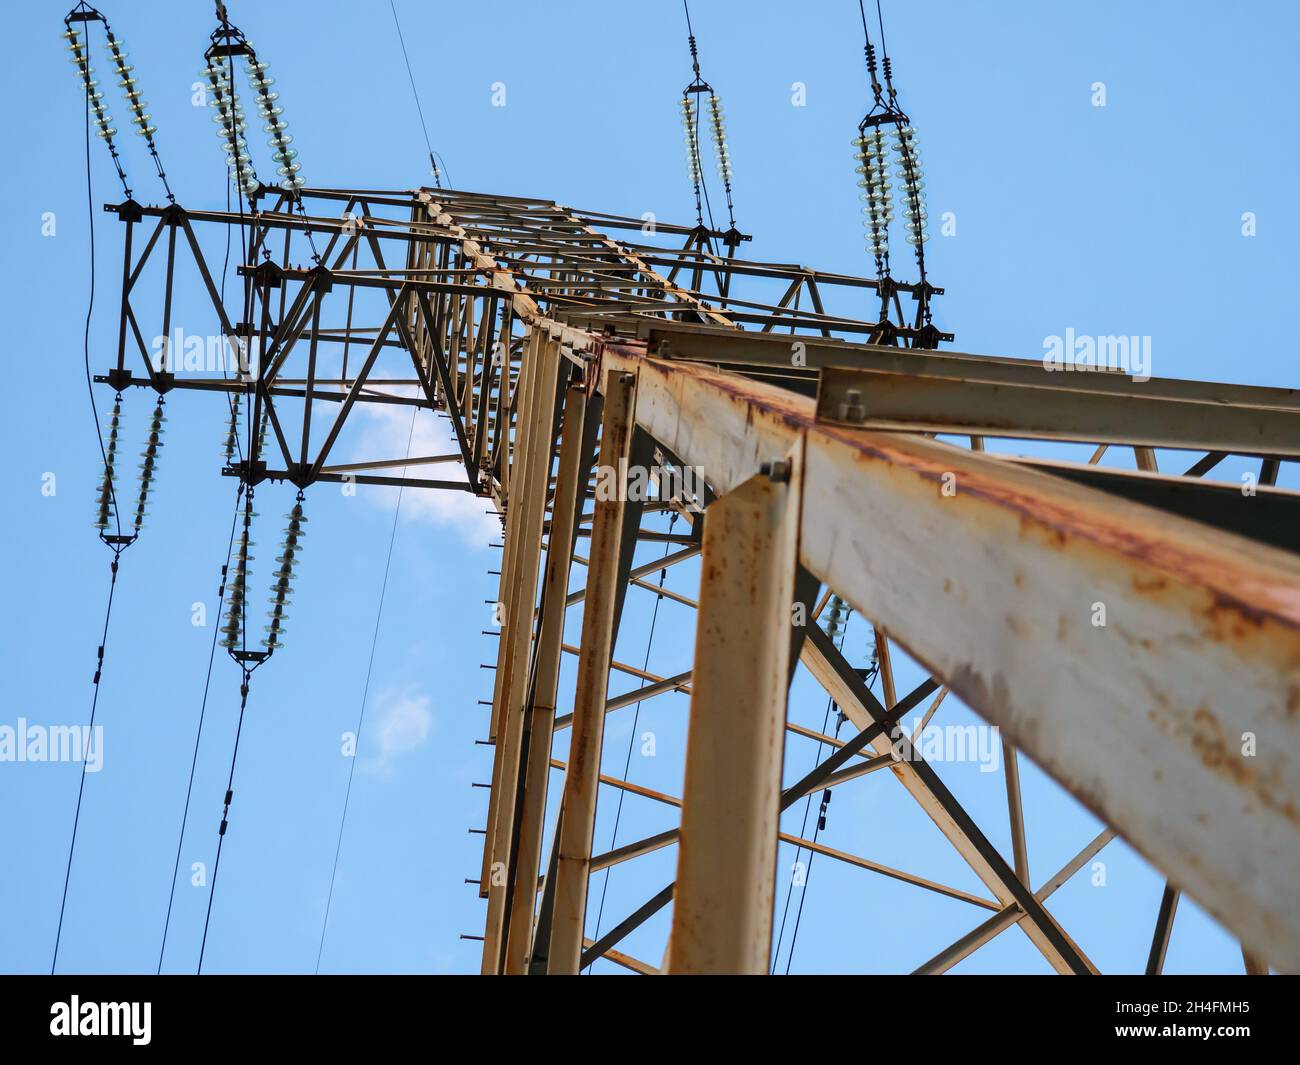 Bottom view over the electric power high voltage transmission line tower in Kyiv, Ukraine. Electric power industry concept. Stock Photo